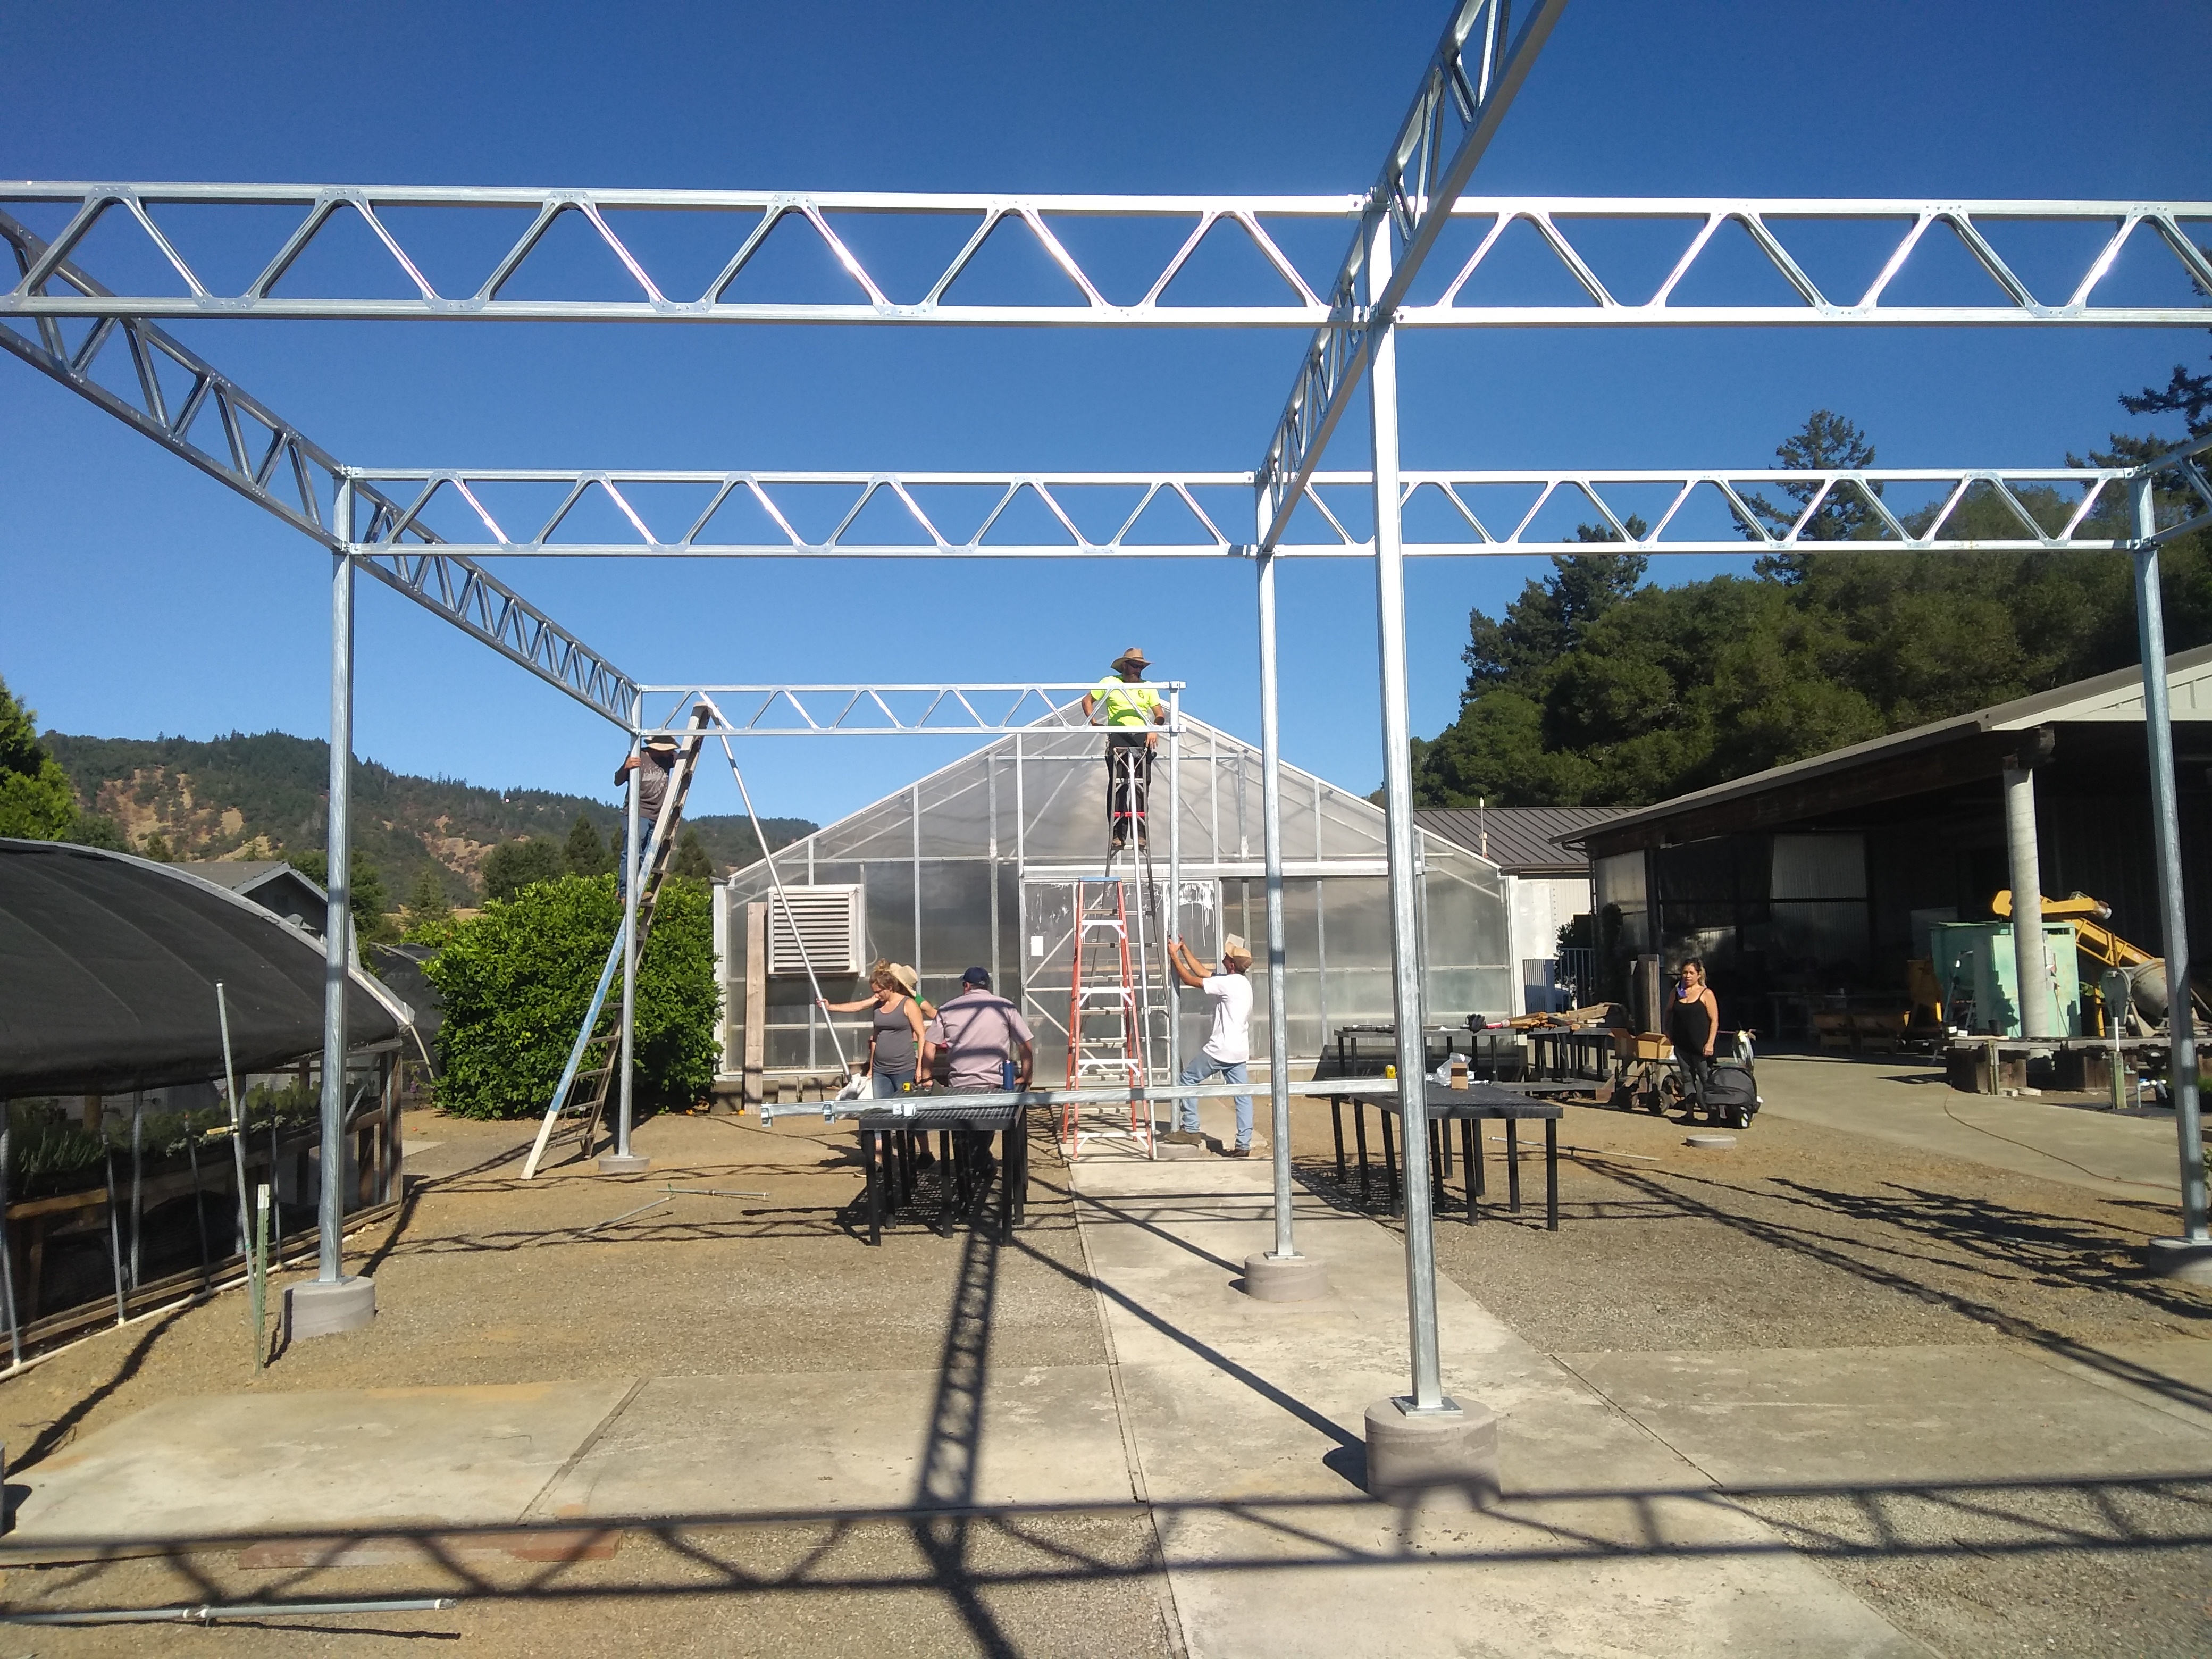 assembling new shade structure